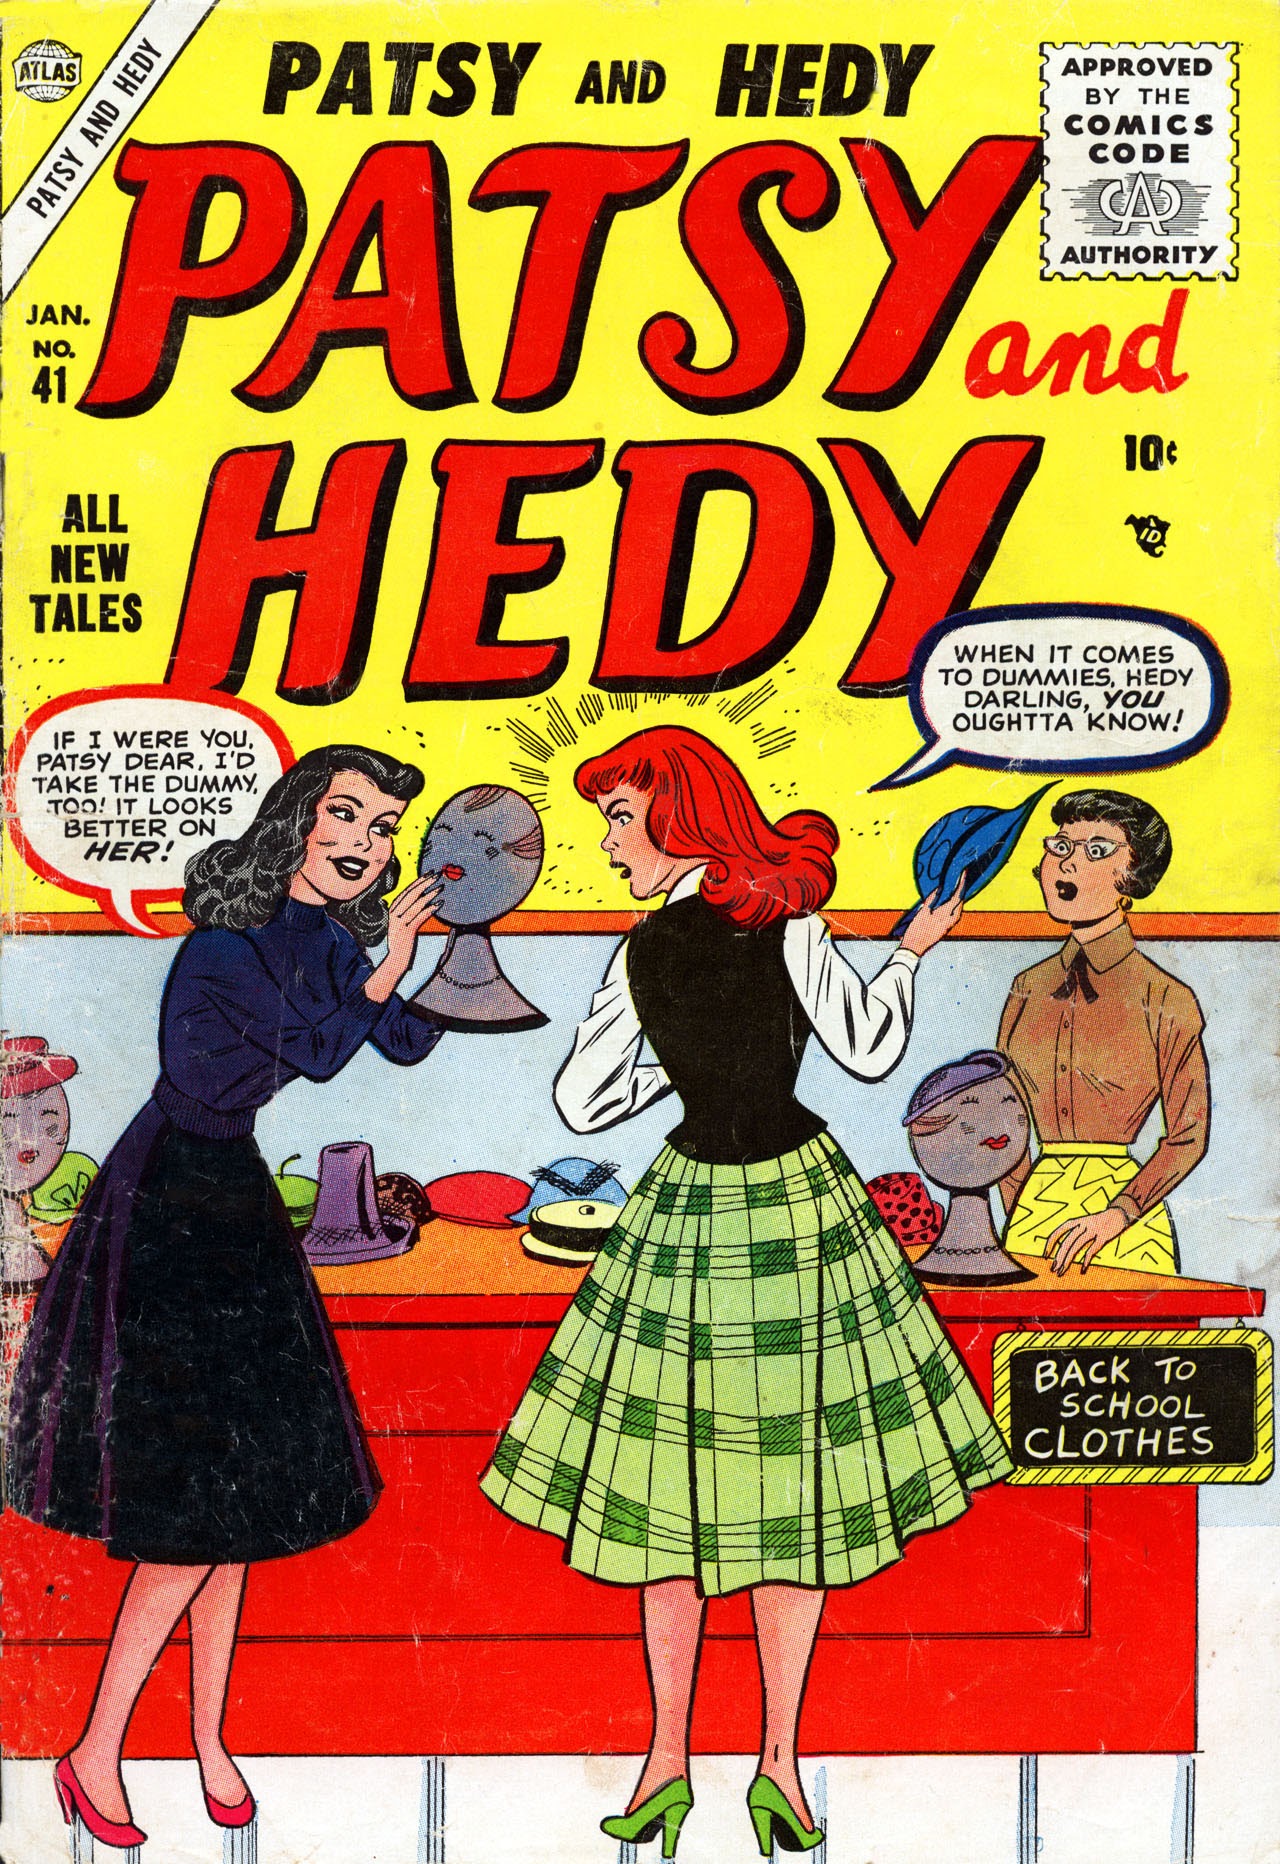 Read online Patsy and Hedy comic -  Issue #41 - 1